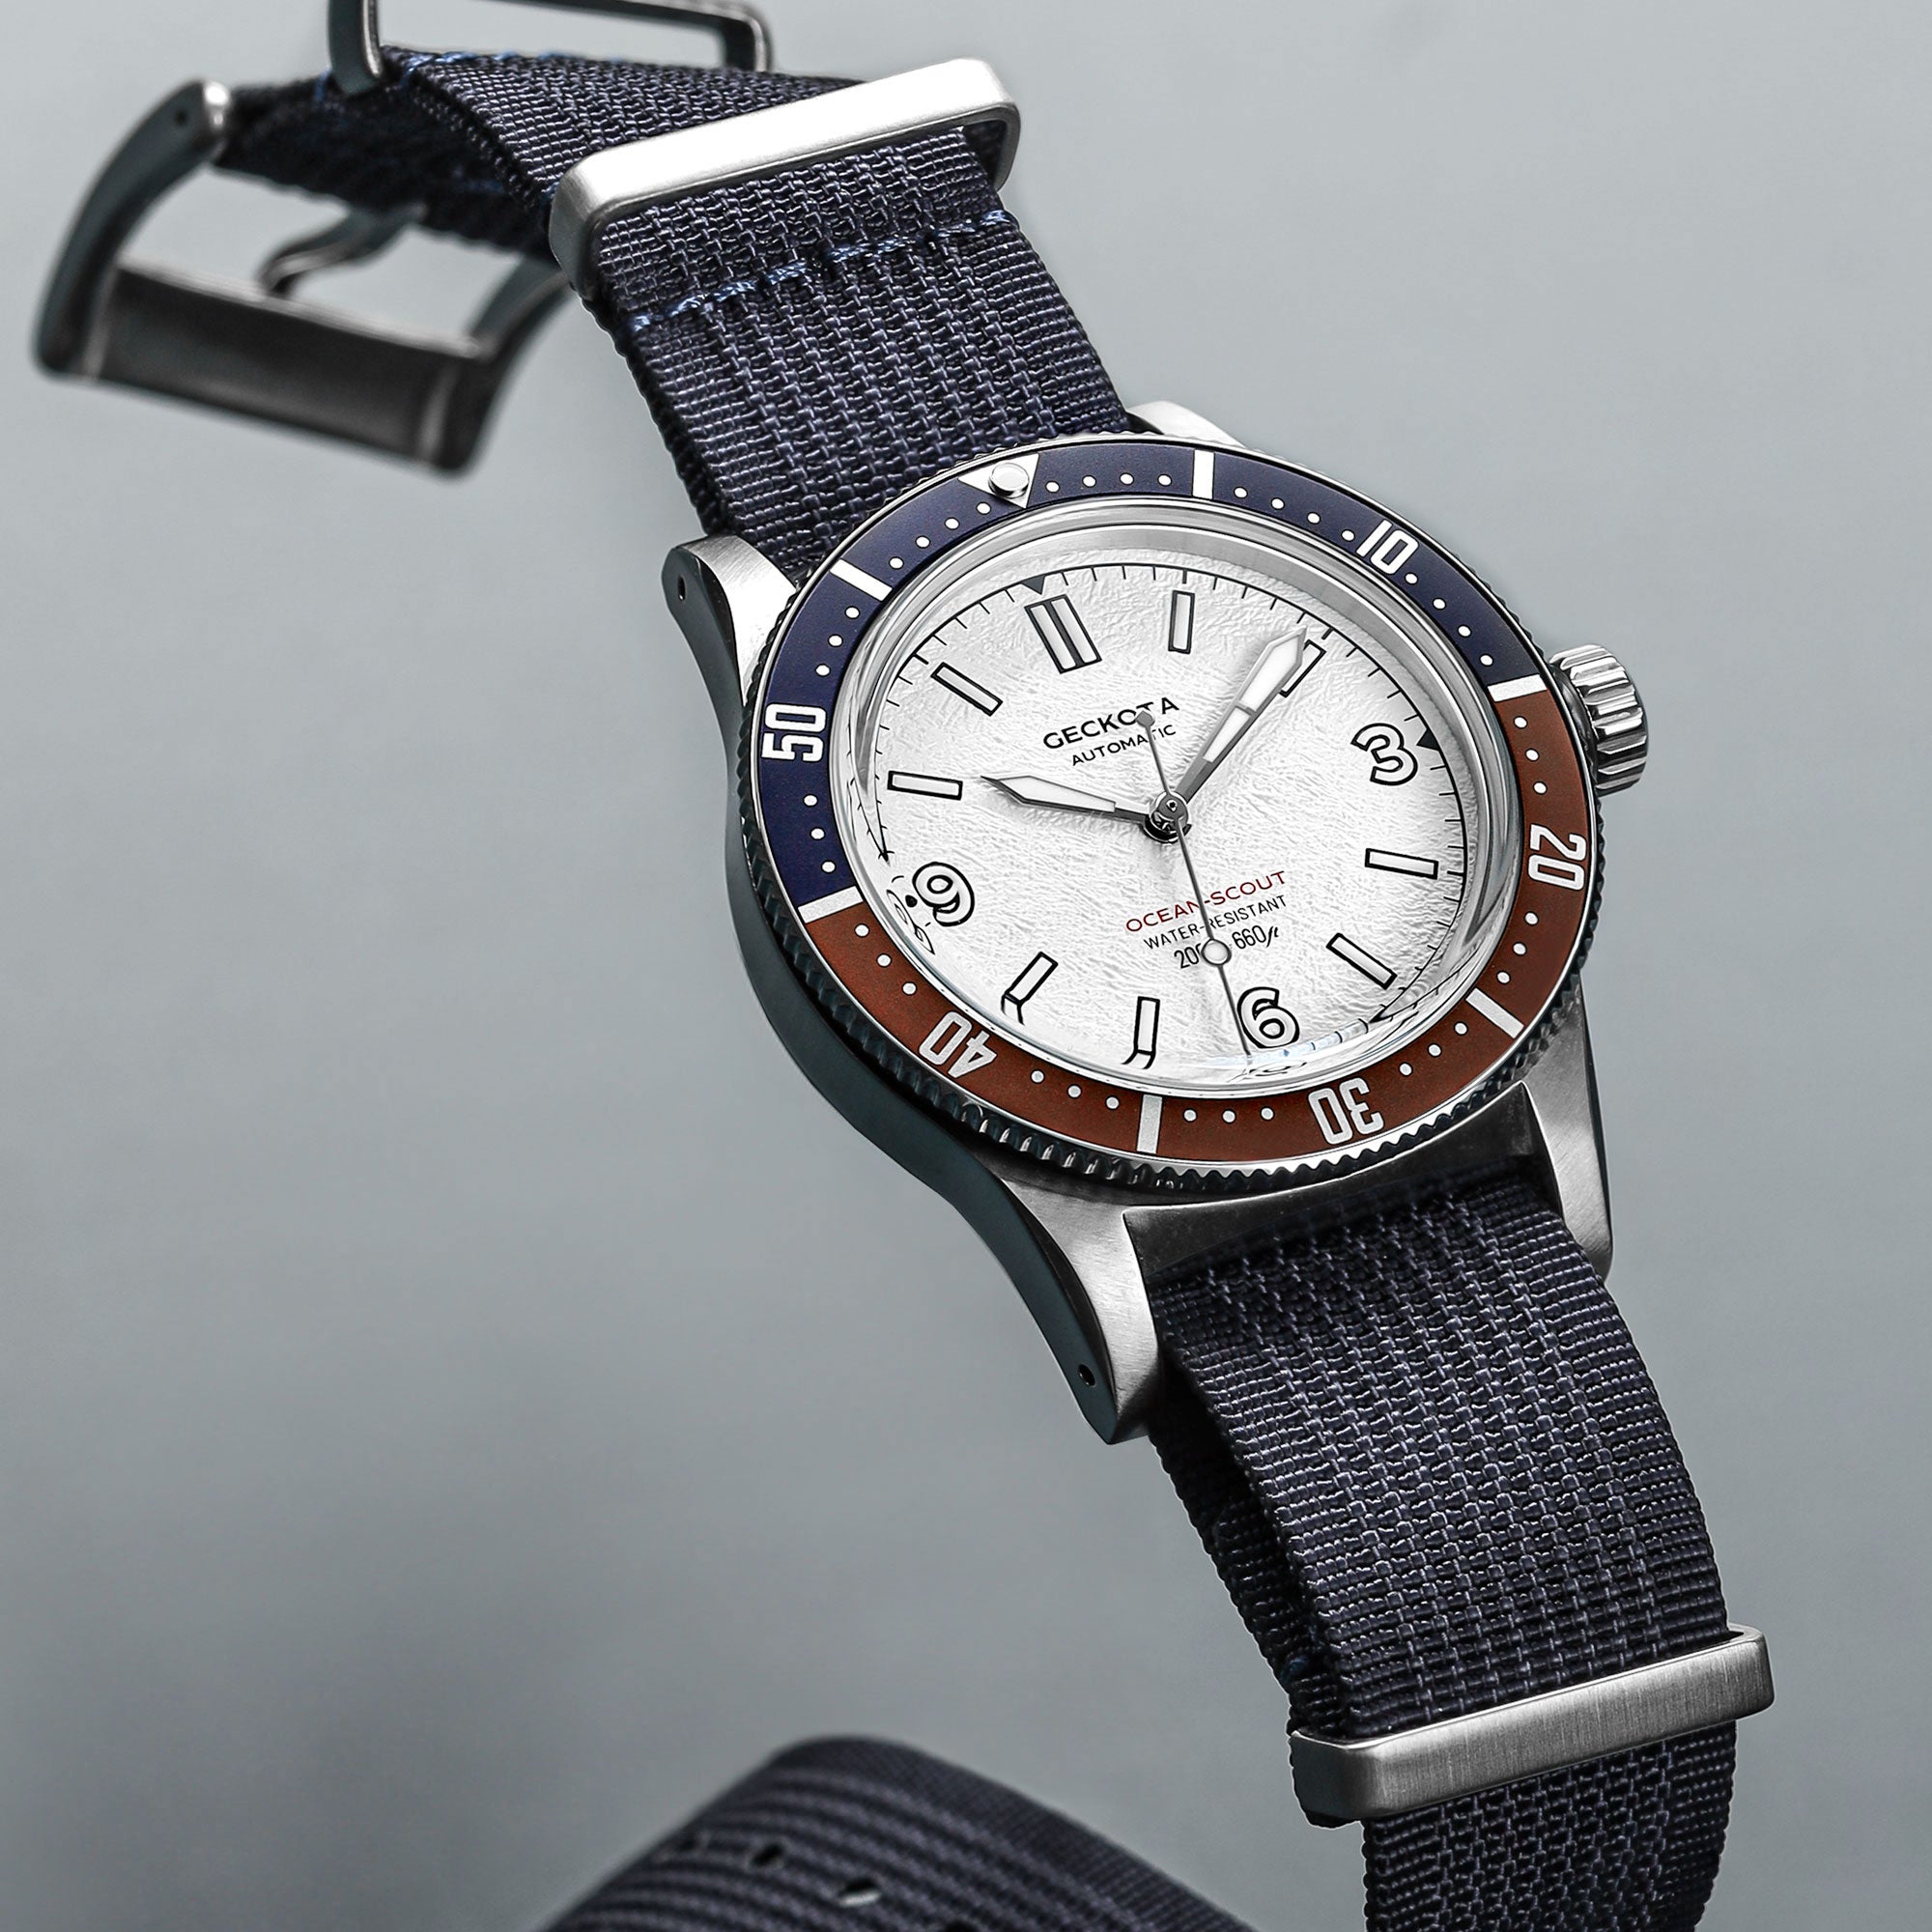 Geckota Ocean-Scout Dive Watch - BWD Arctic - Berwick Stainless Steel Strap - additional image 1